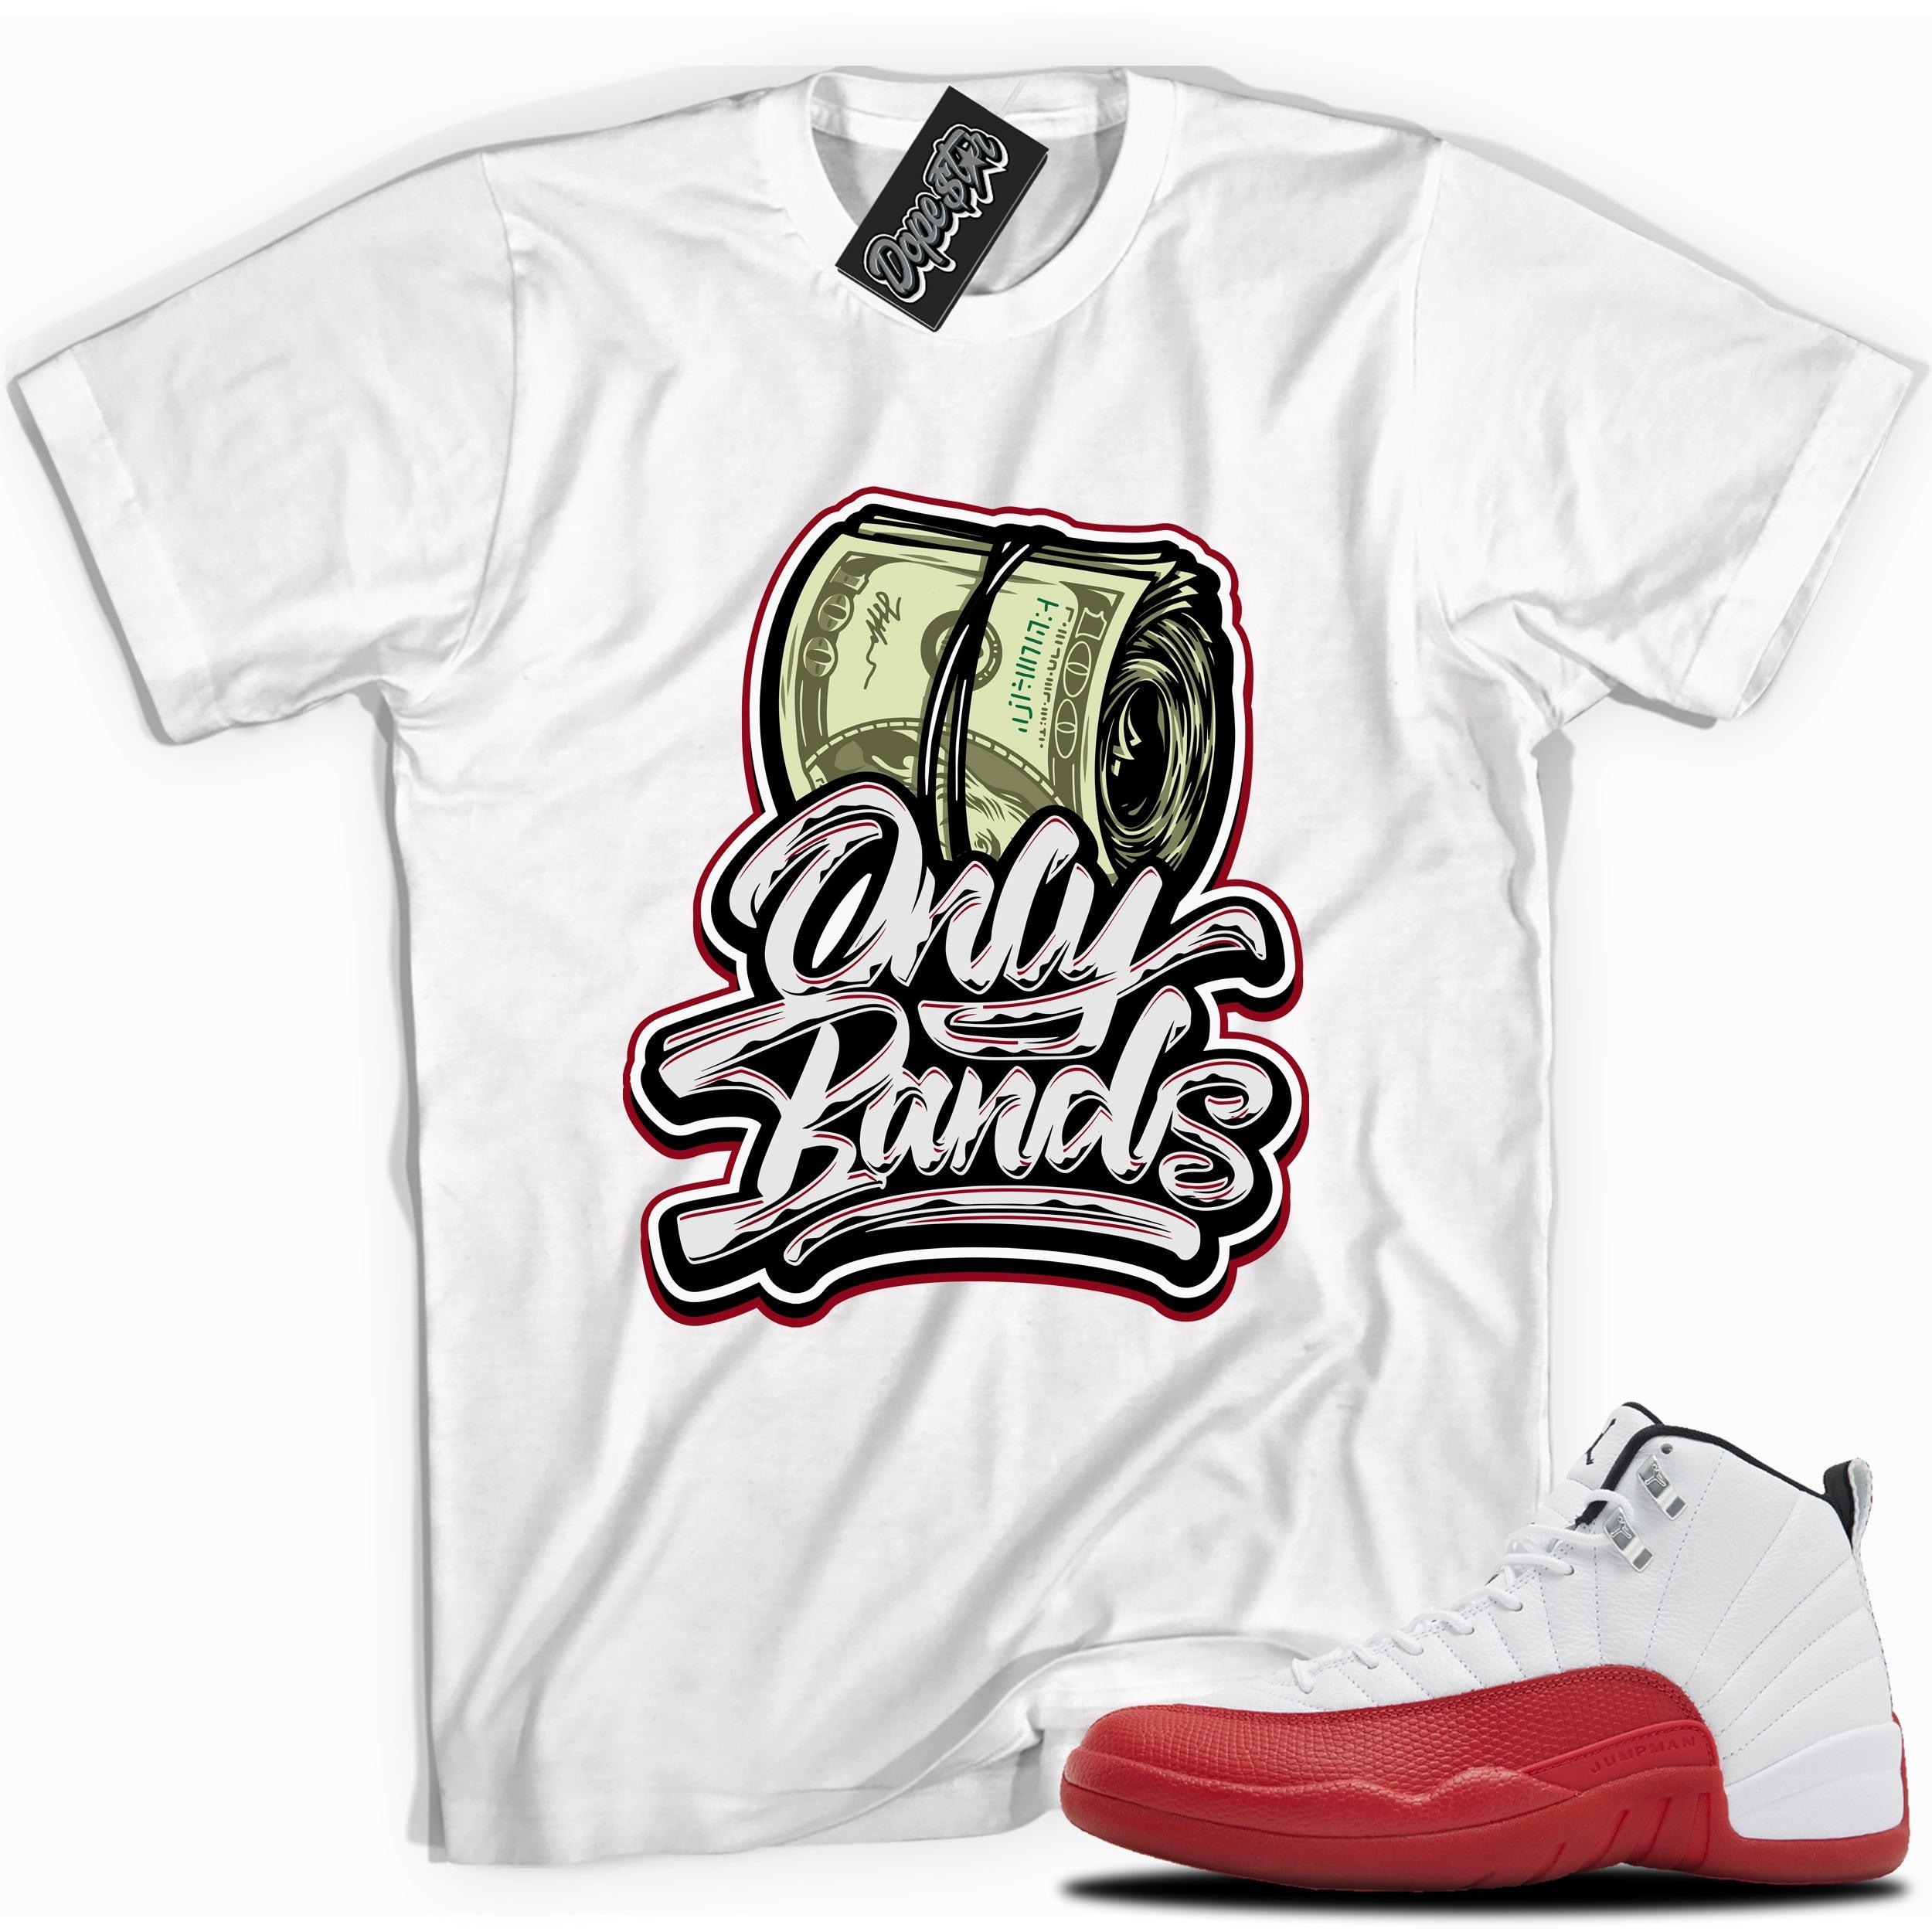 Cool White graphic tee with “ONLY BANDS” print, that perfectly matches Air Jordan 12 Retro Cherry Red 2023 red and white sneakers